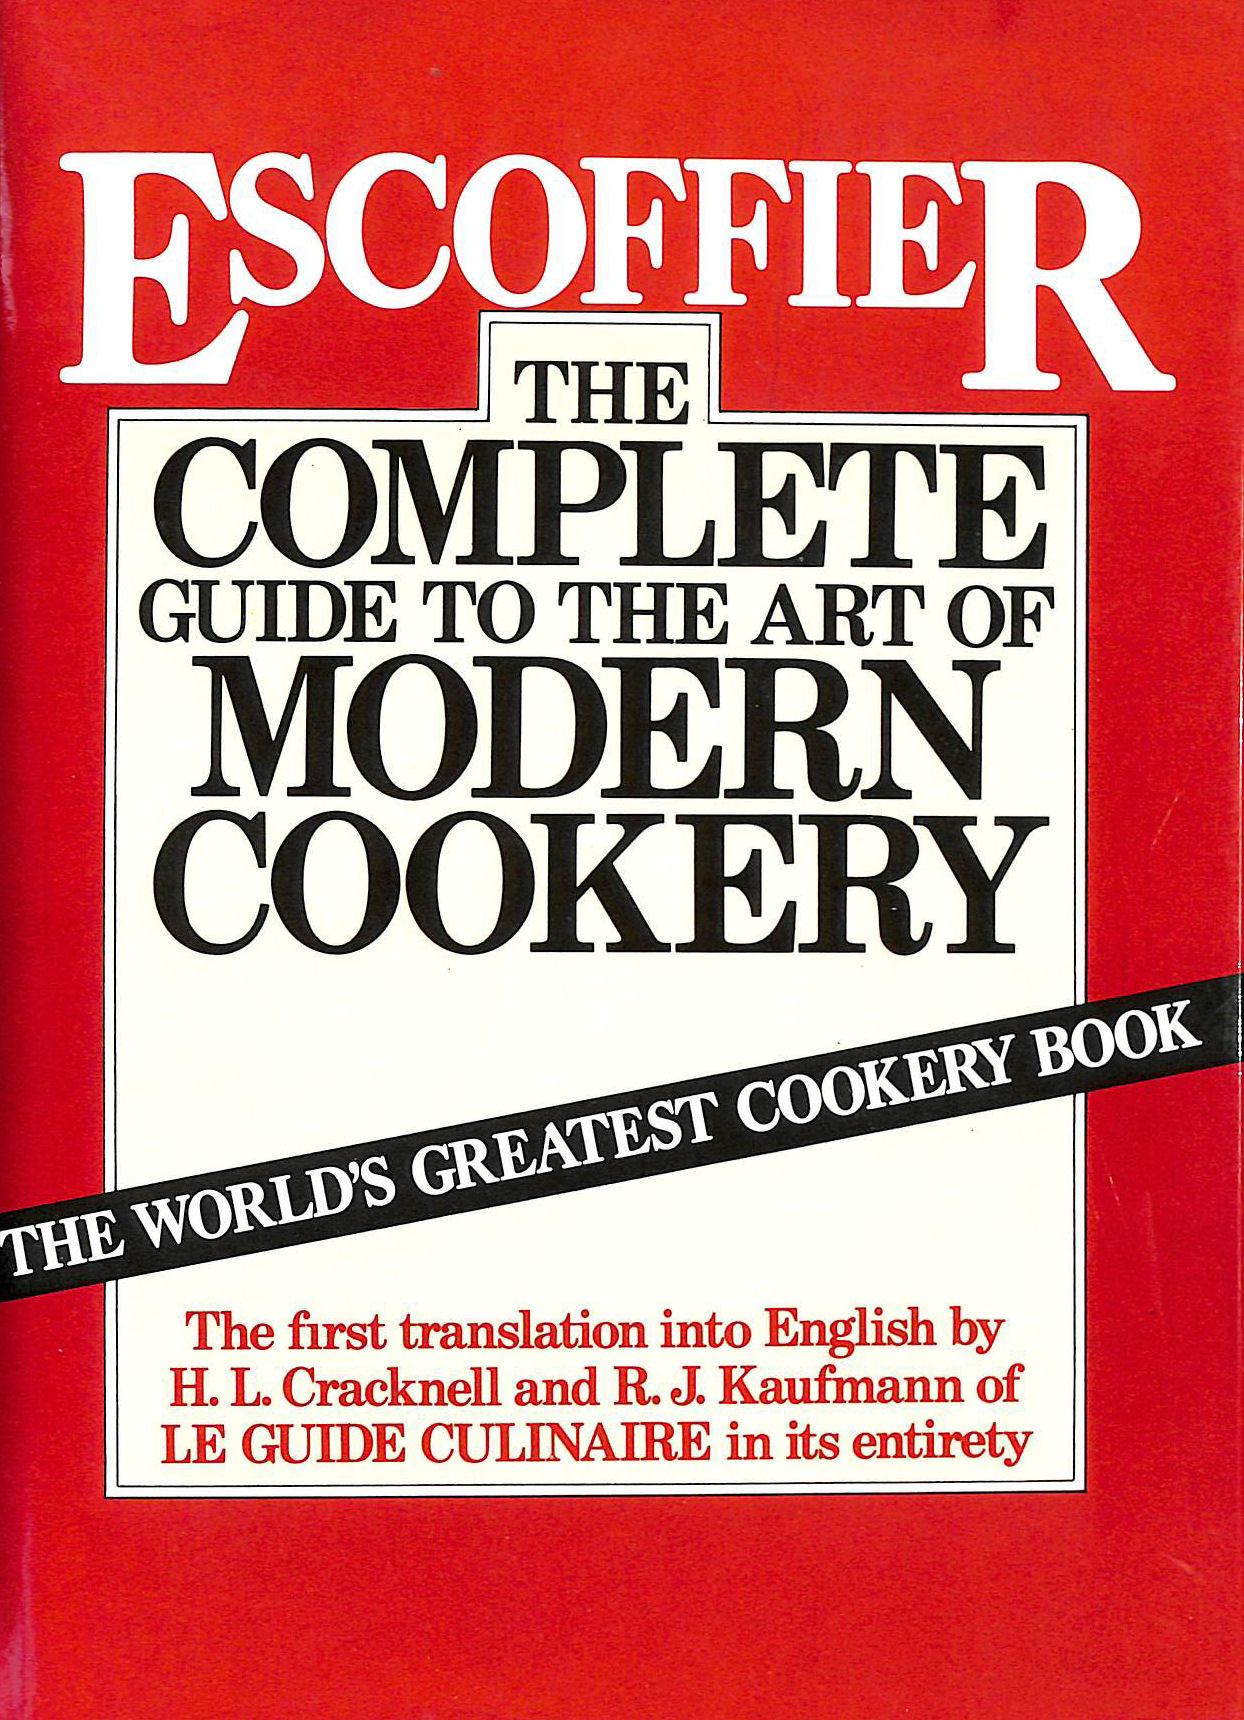 ESCOFFIER, A.; CRACKNELL, H.L. [TRANSLATOR]; KAUFMANN, R.J. [TRANSLATOR]; - The Complete Guide to the Art of Modern Cookery